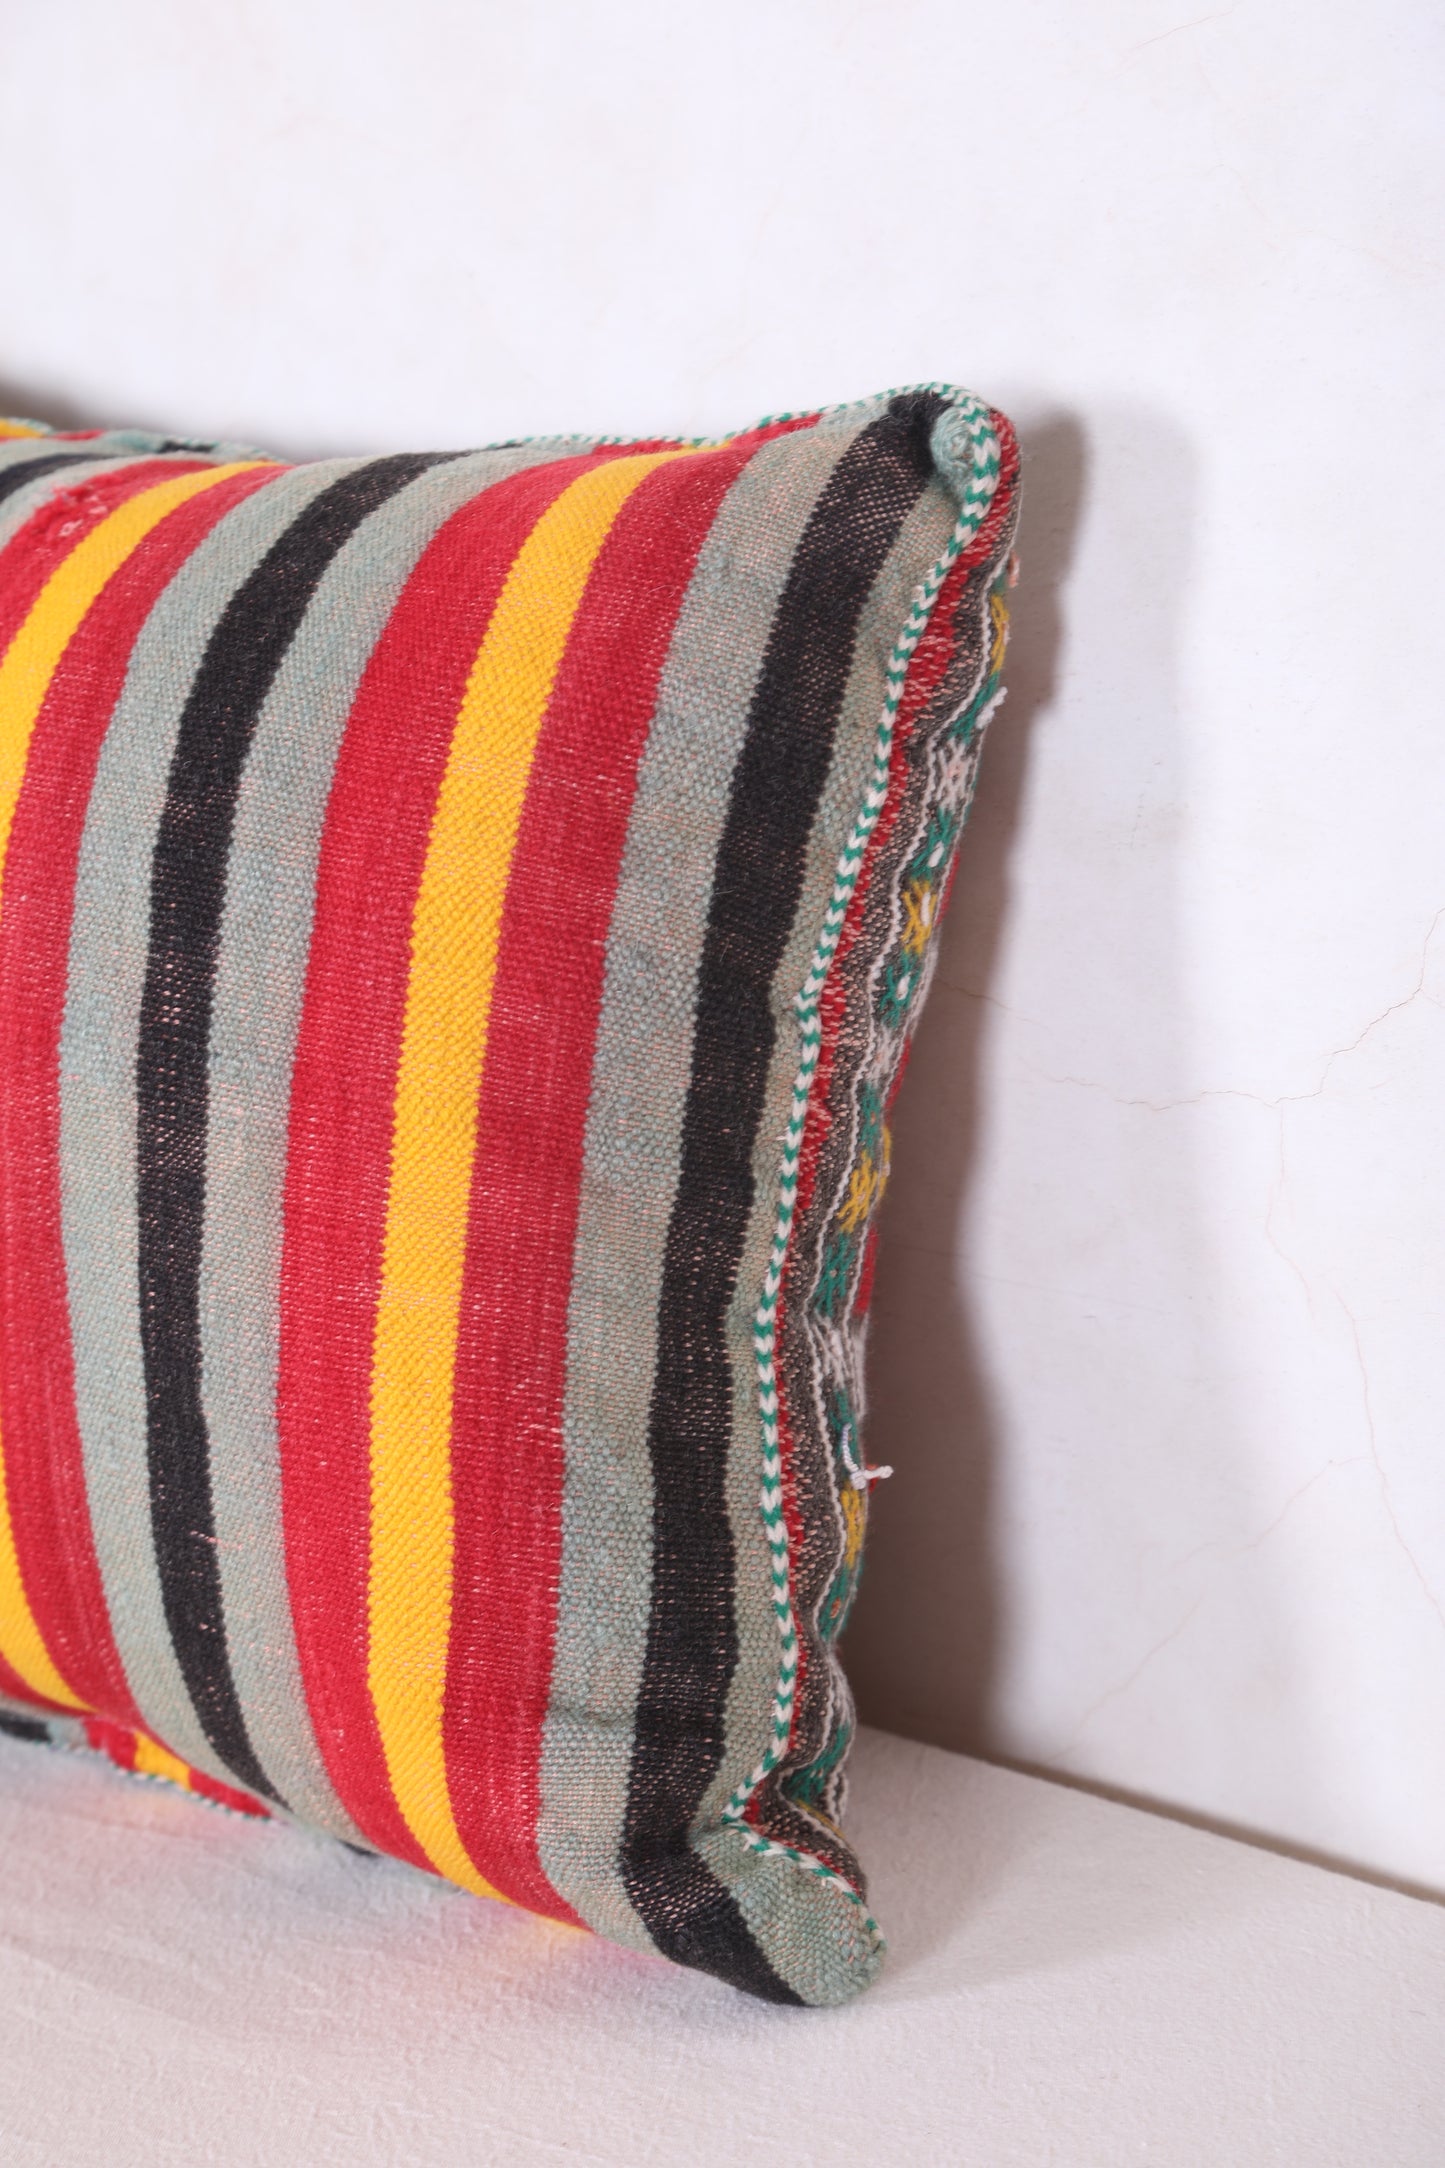 Moroccan Pillow 15.3 INCHES X 19.2 INCHES